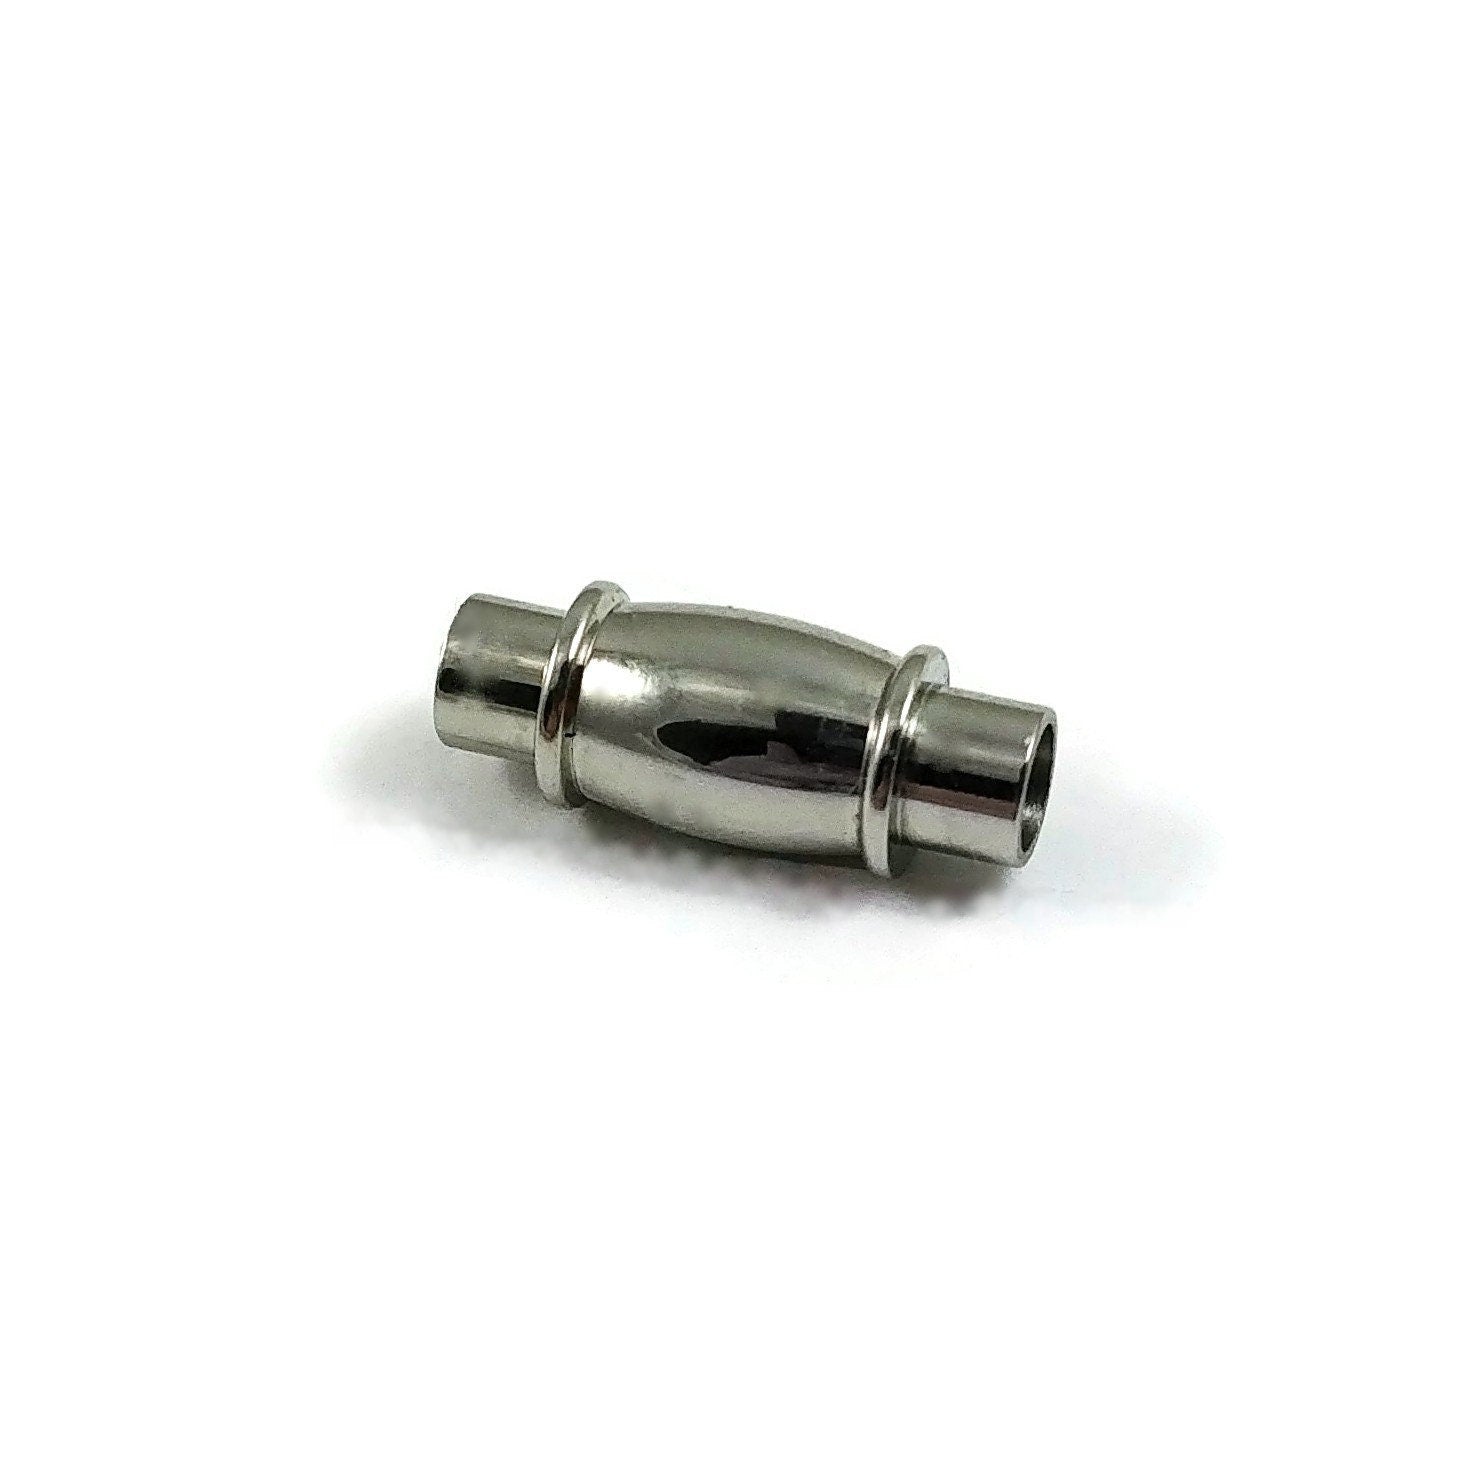 Stainless steel magnetic clasps, Fits 3mm, Jewelry making cord ends, Bracelet and necklace findings